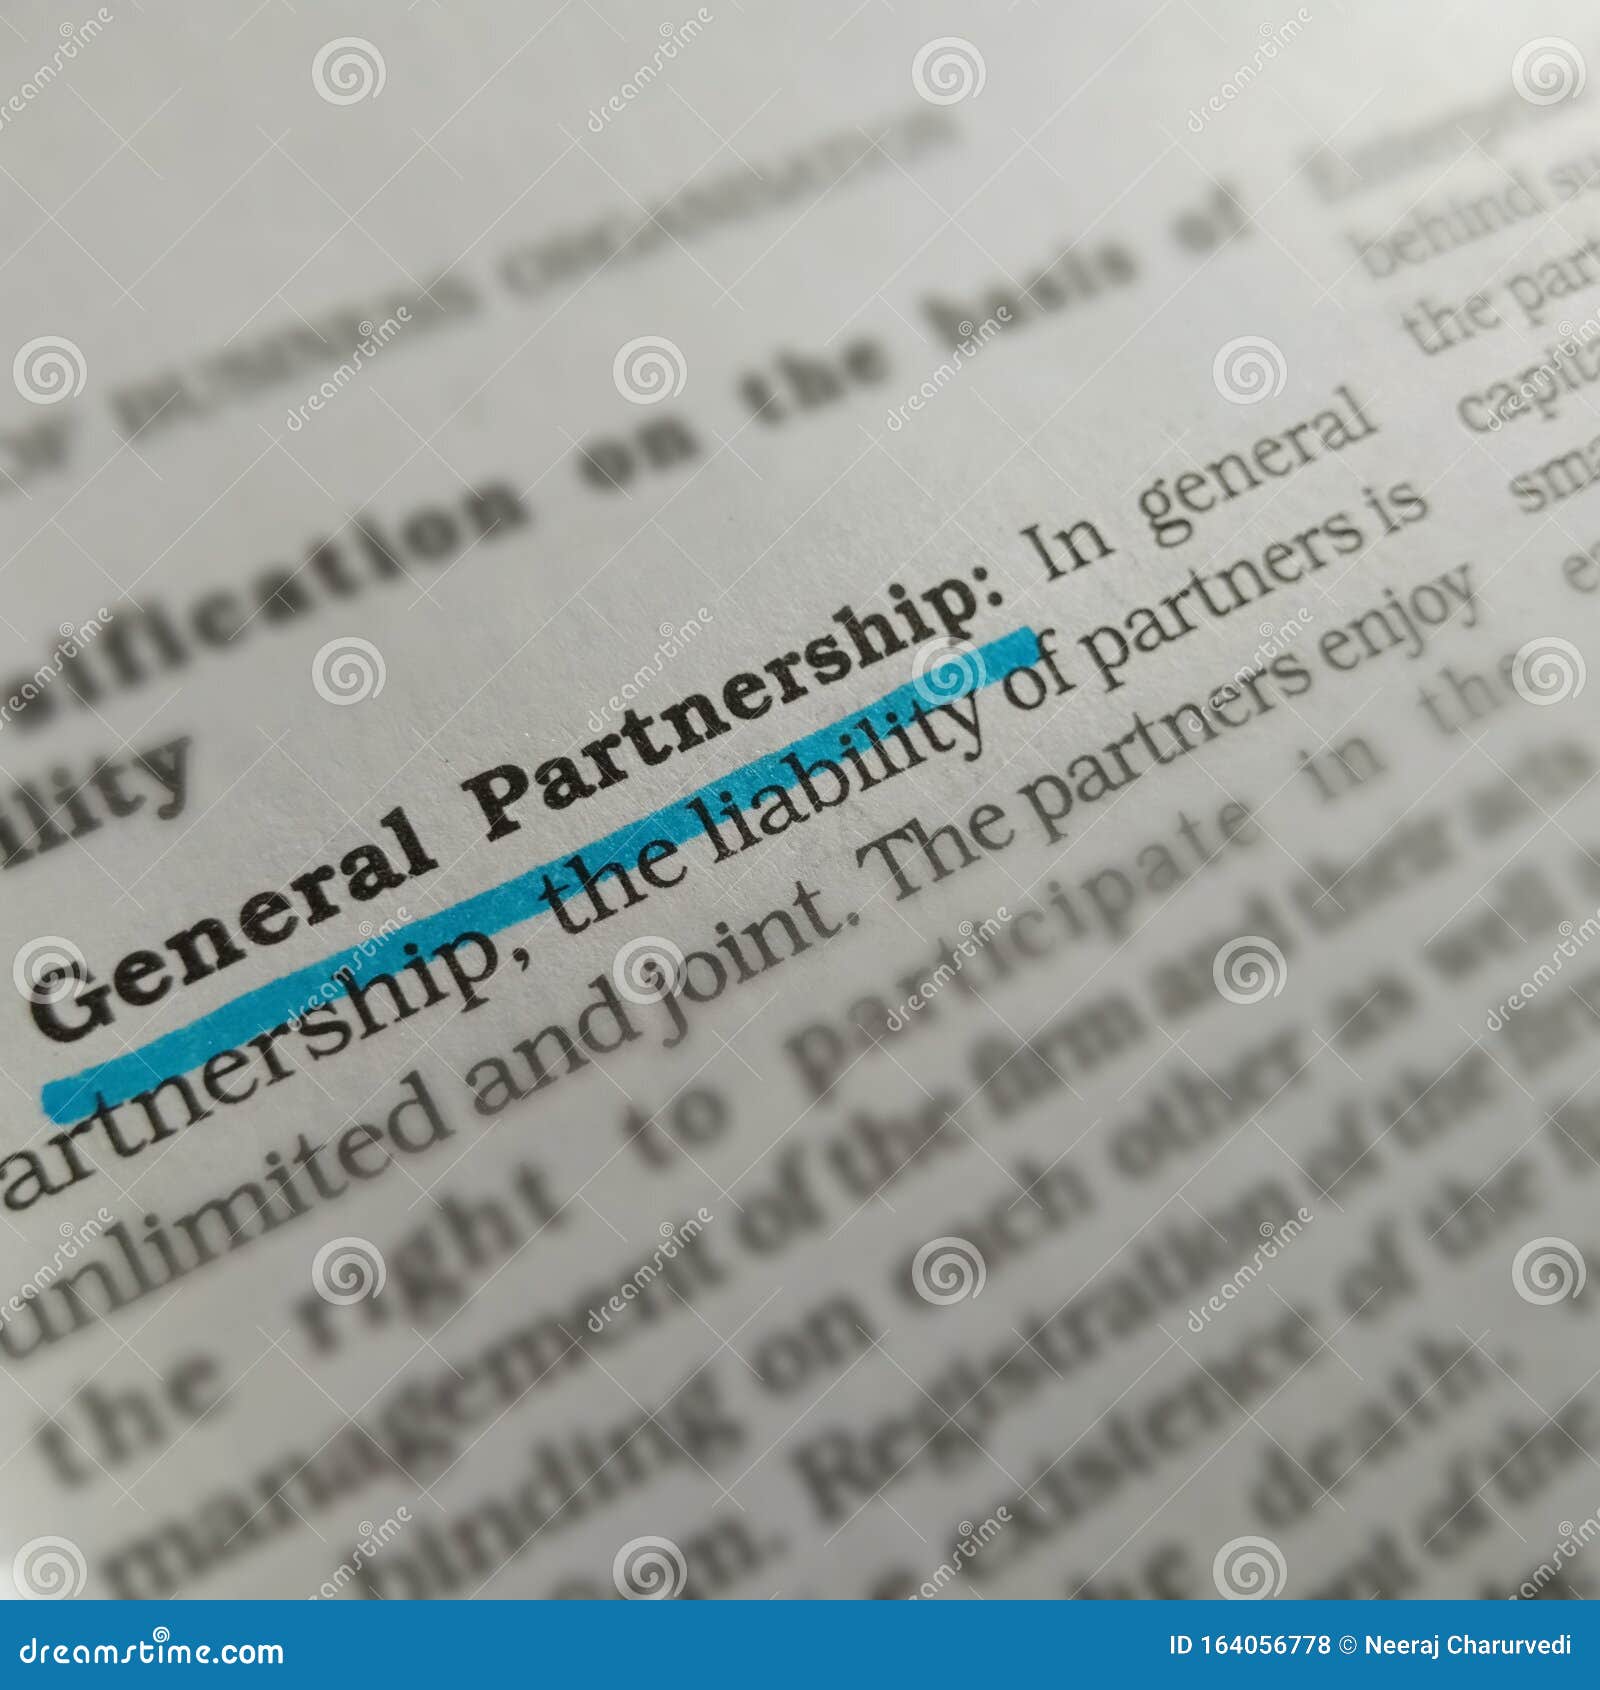 general partnership business related terminology displayed on underlined text form